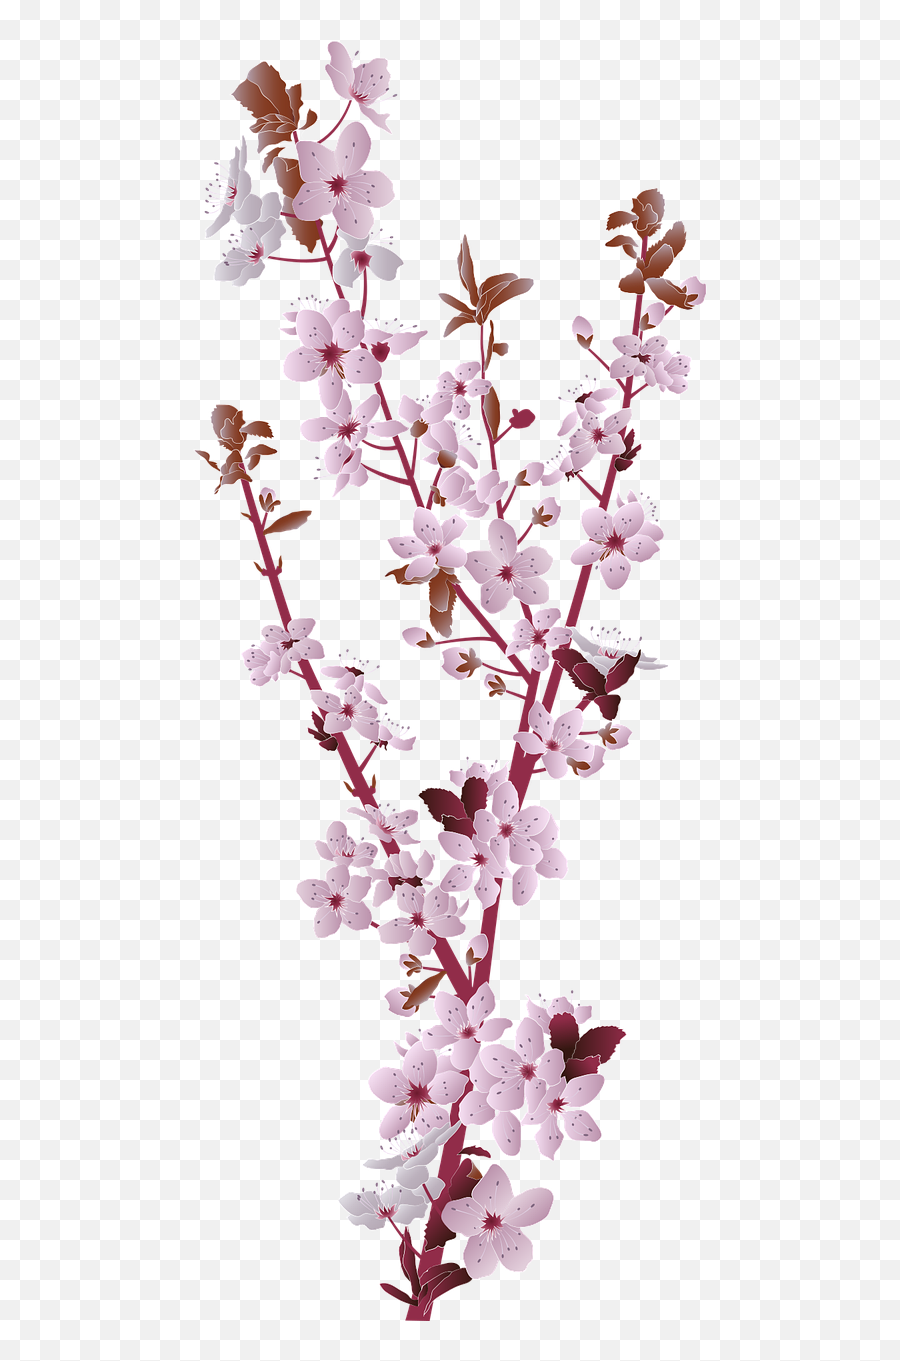 Cherry Blossom Tree - Free Vector Graphic On Pixabay Blossom Pixabay Emoji,Cherry Blossom Transparent Background